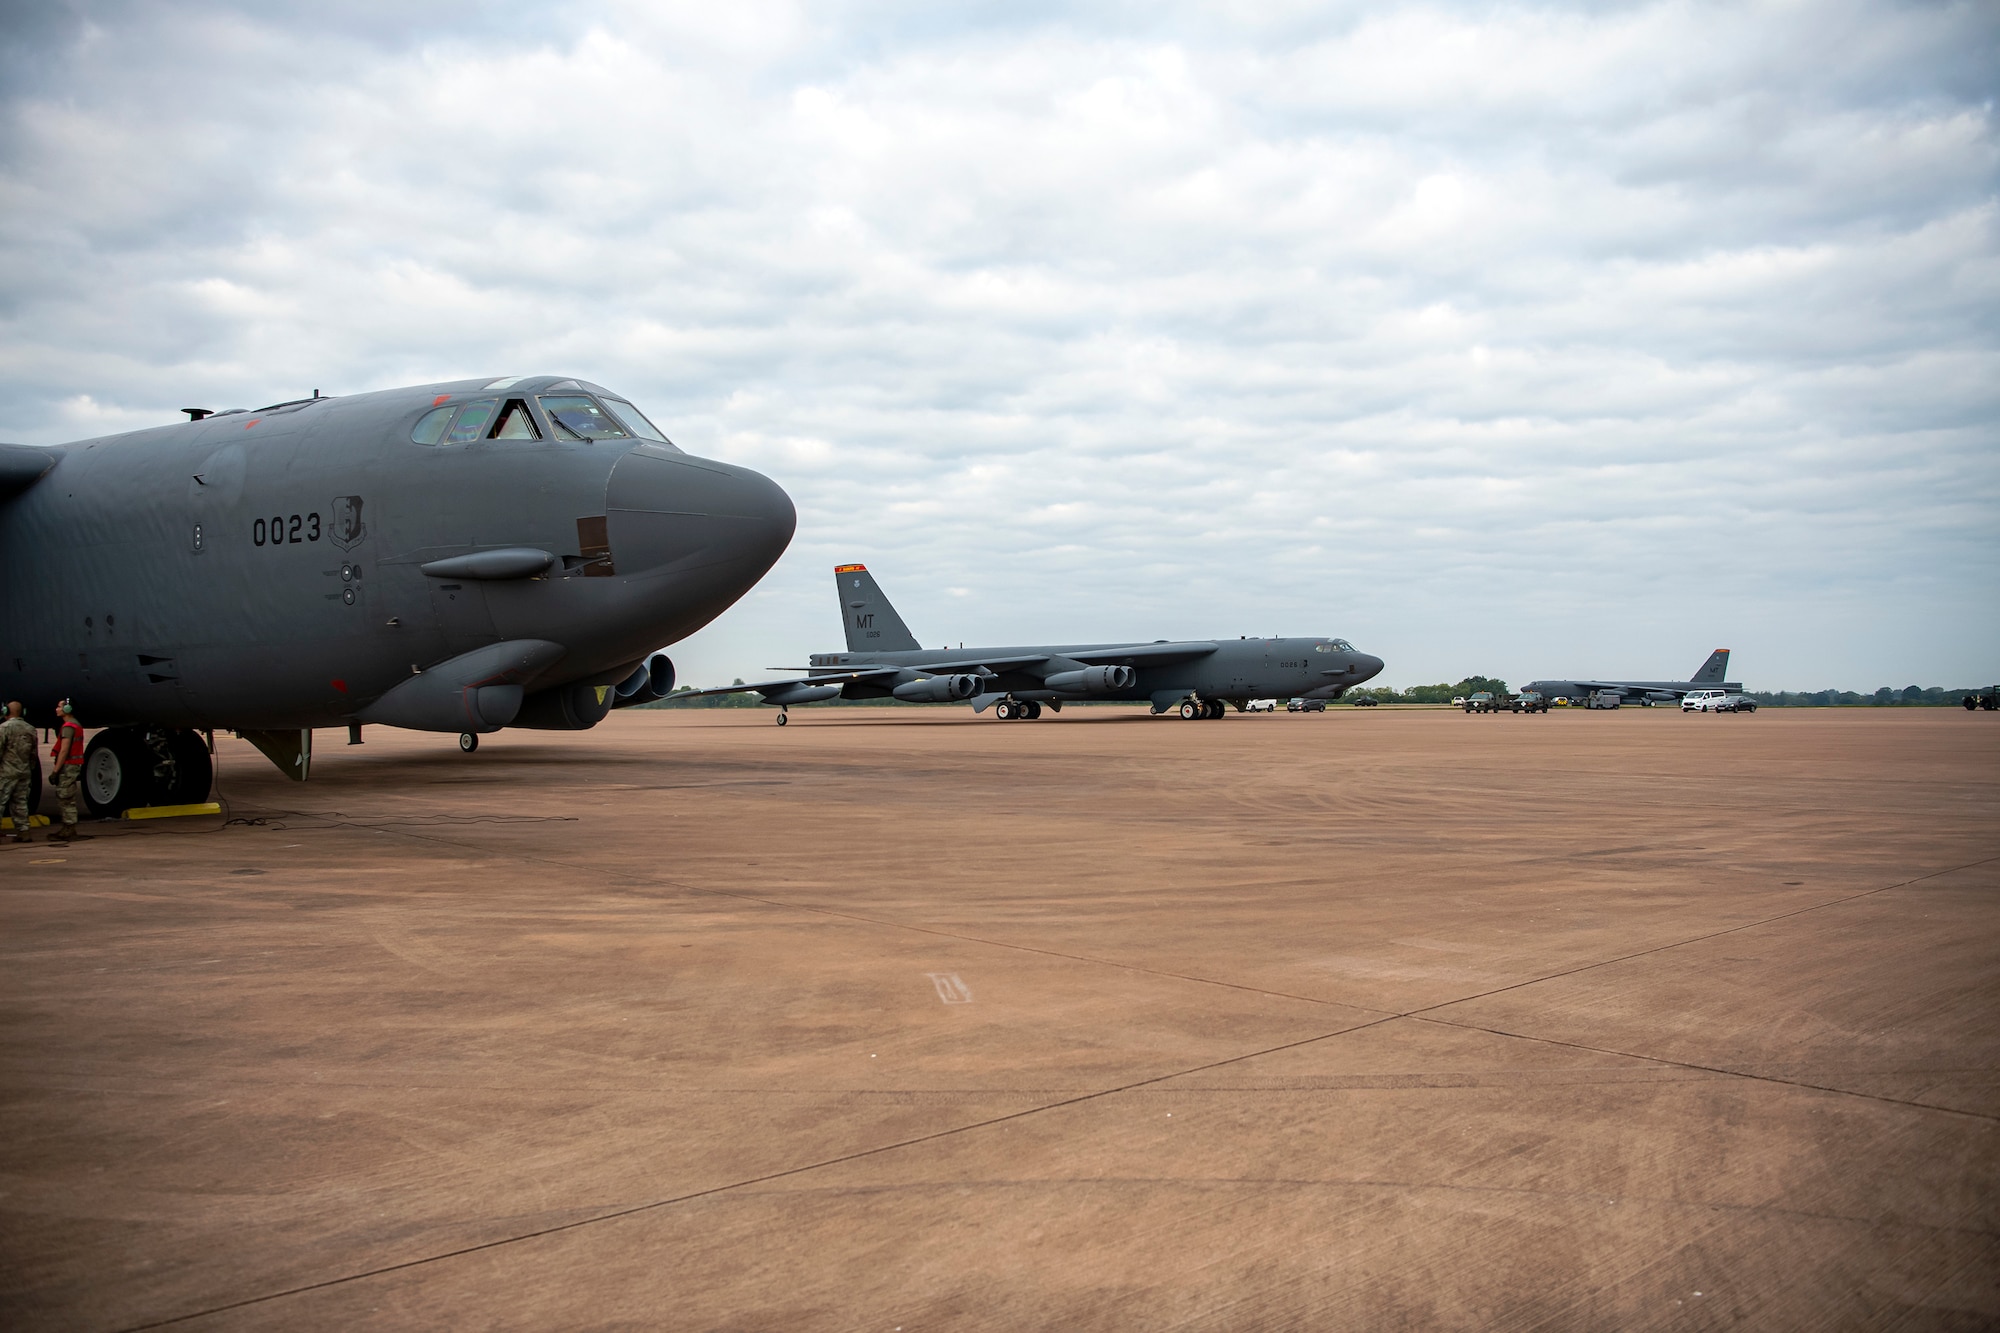 B-52 Stratofortress aircraft assigned to the 23rd Expeditionary Bomb Squadron que on the flightline prior to takeoff at RAF Fairford, United Kingdom, Sept. 21, 2022. The aircraft were part of a Bomber Task Force which is the global employment of U.S. strategic bombers, that provide strategic military advantage to achieve national and combatant commander objectives. (U.S. Air Force photo by Staff Sgt. Eugene Oliver)